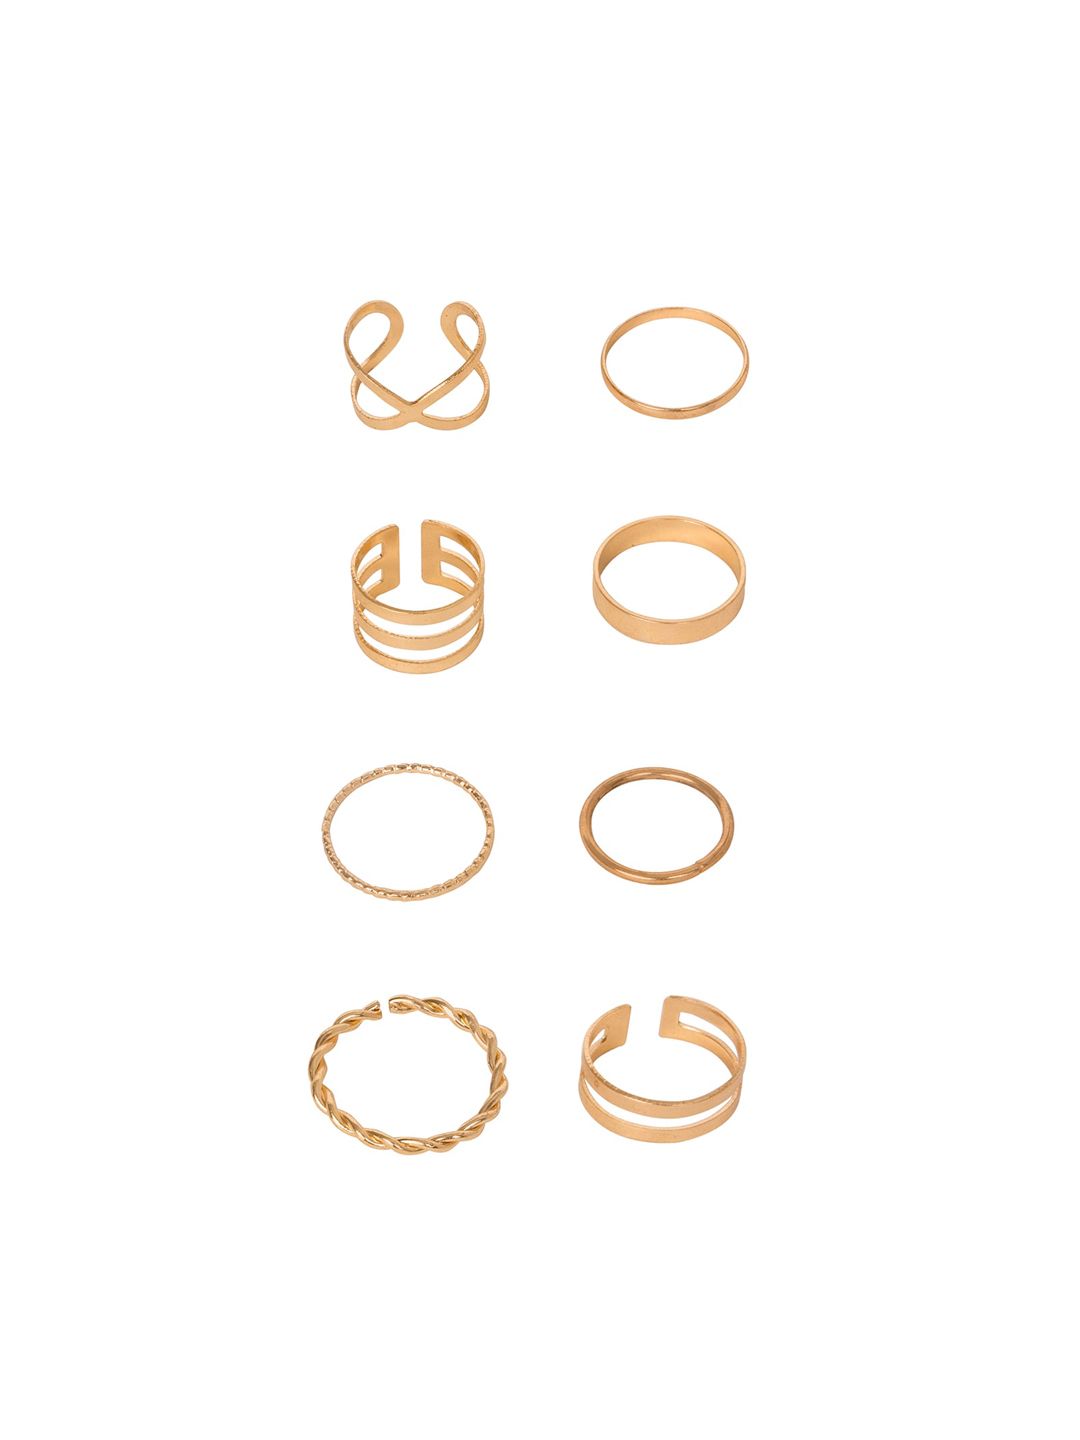 FabAlley Set Of 8 Gold-Plated Rings Price in India